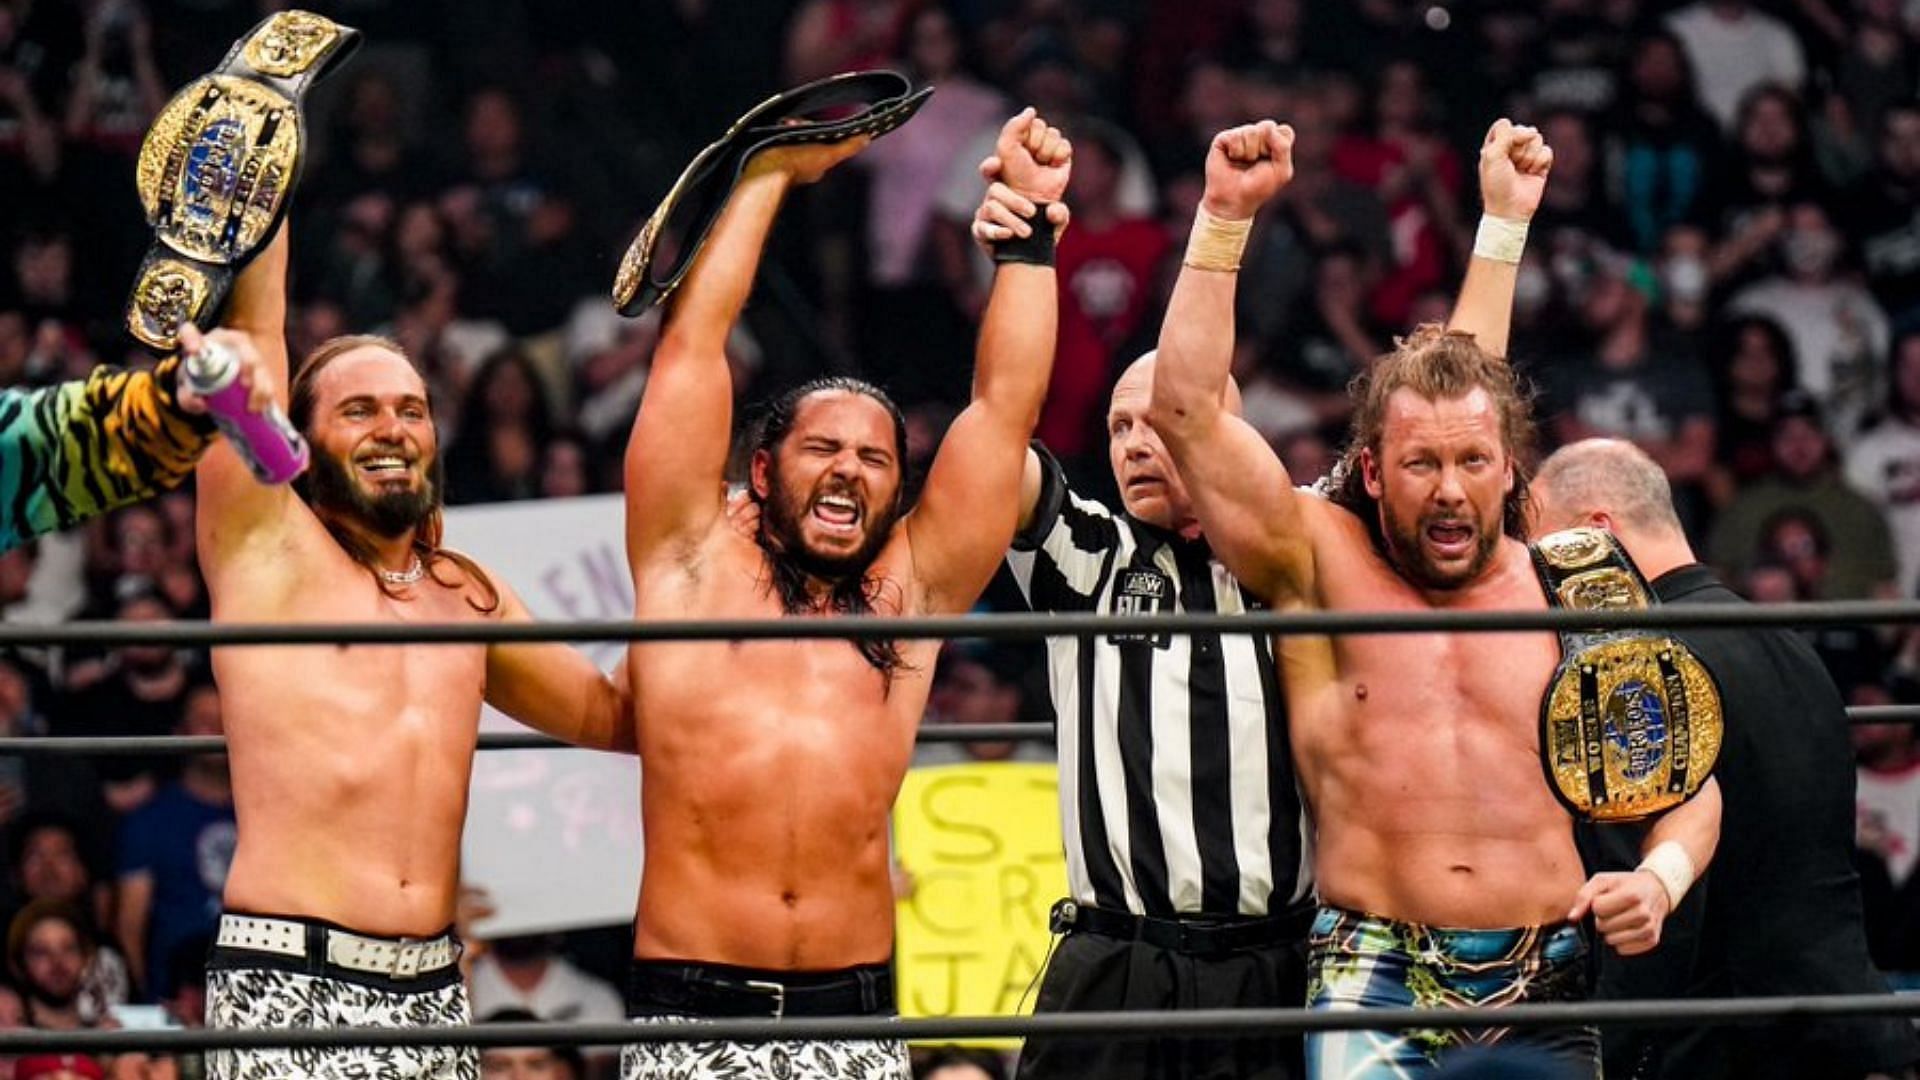 The Elite are back on AEW television